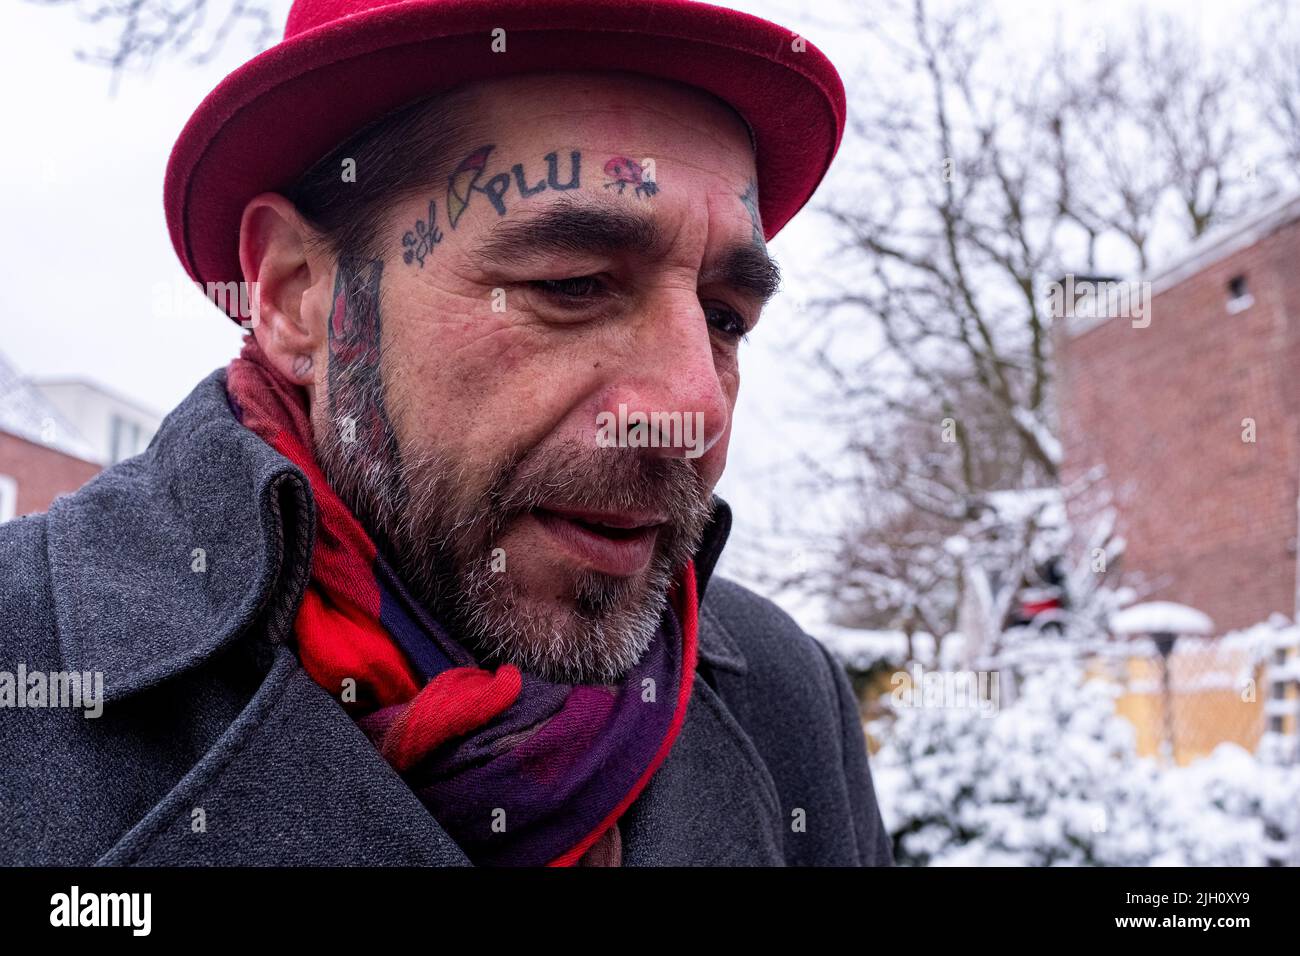 Tilburg, Netherlands. Street Portrait of a tattooed man wearing a hat during his first snow of the year stroll down town, during a Corona Crisis Lock Down. Stock Photo